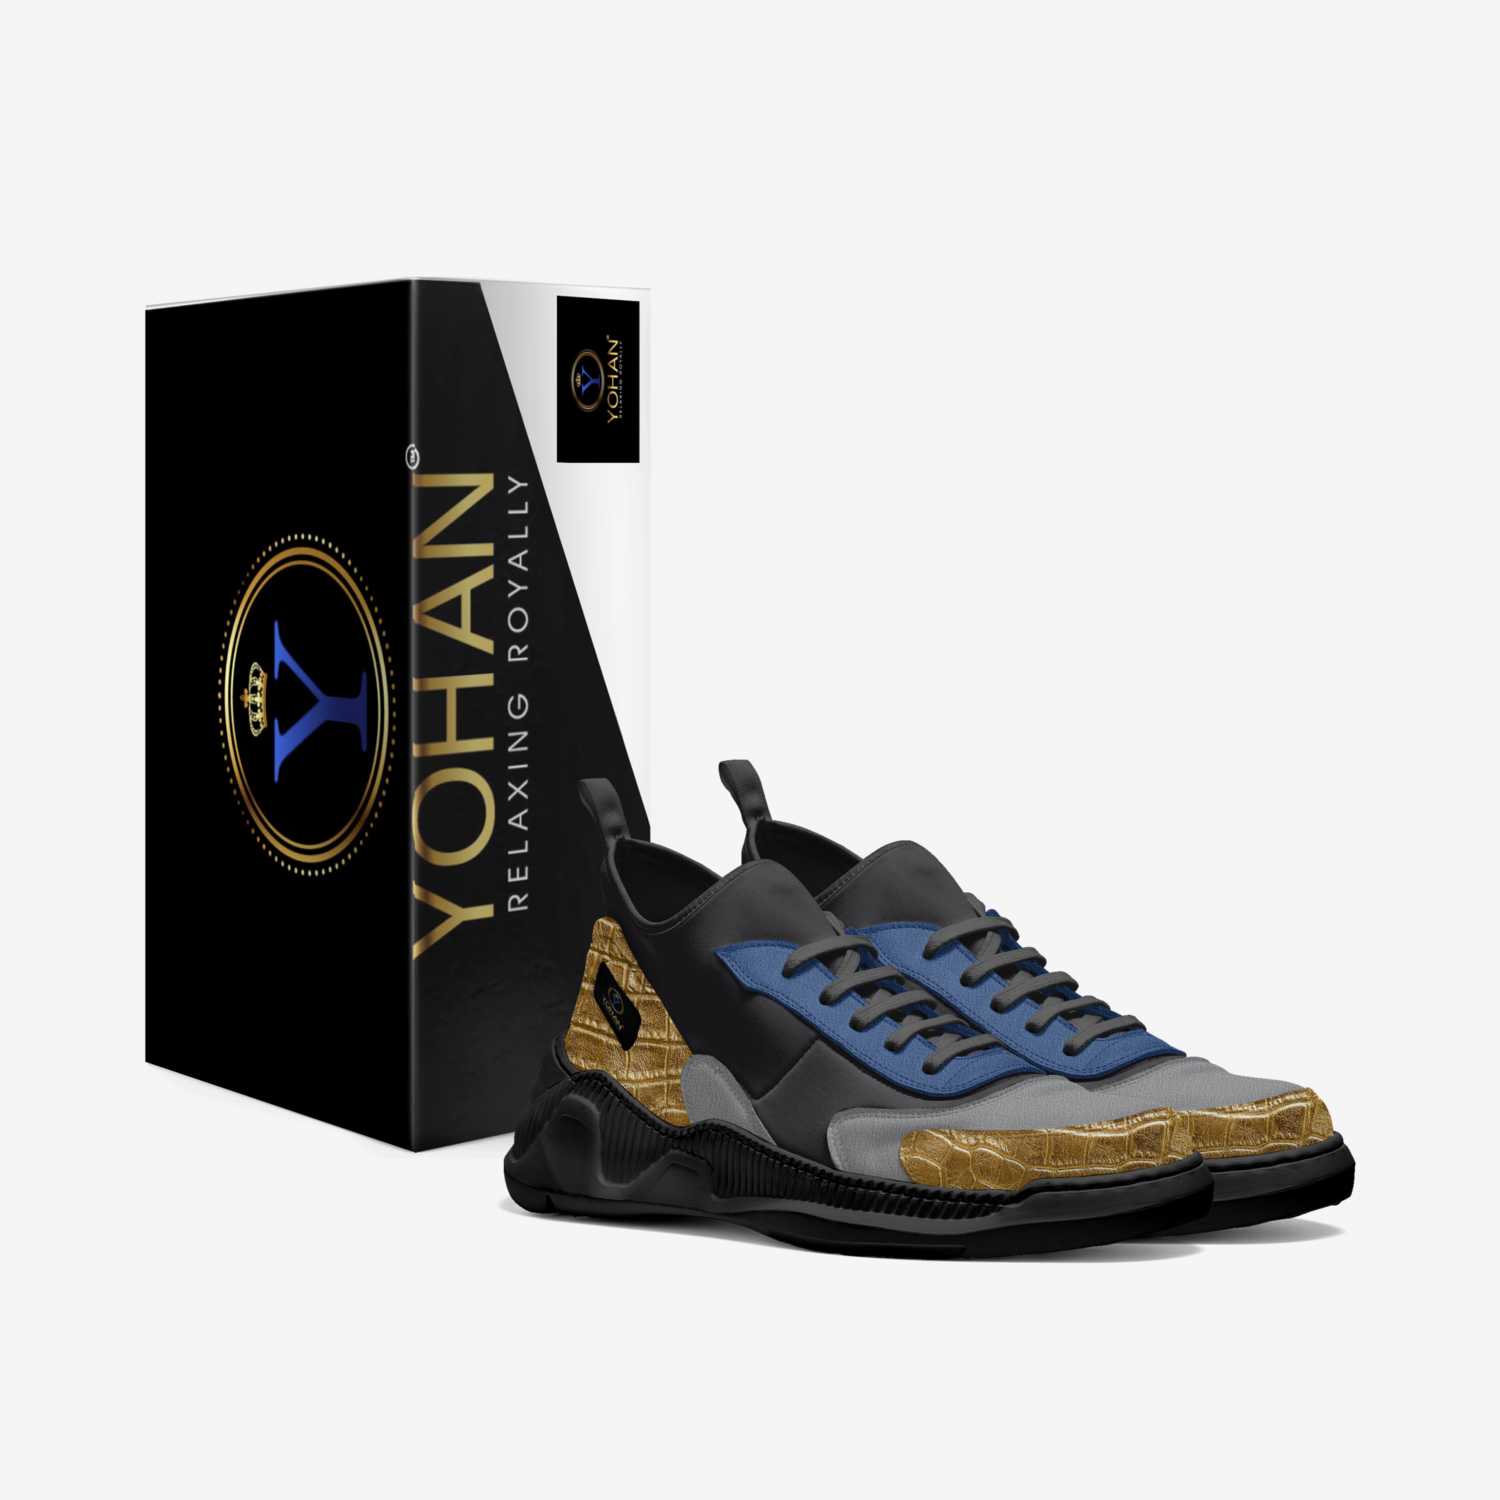 Yohan Agility 1s custom made in Italy shoes by Mark Boson | Box view